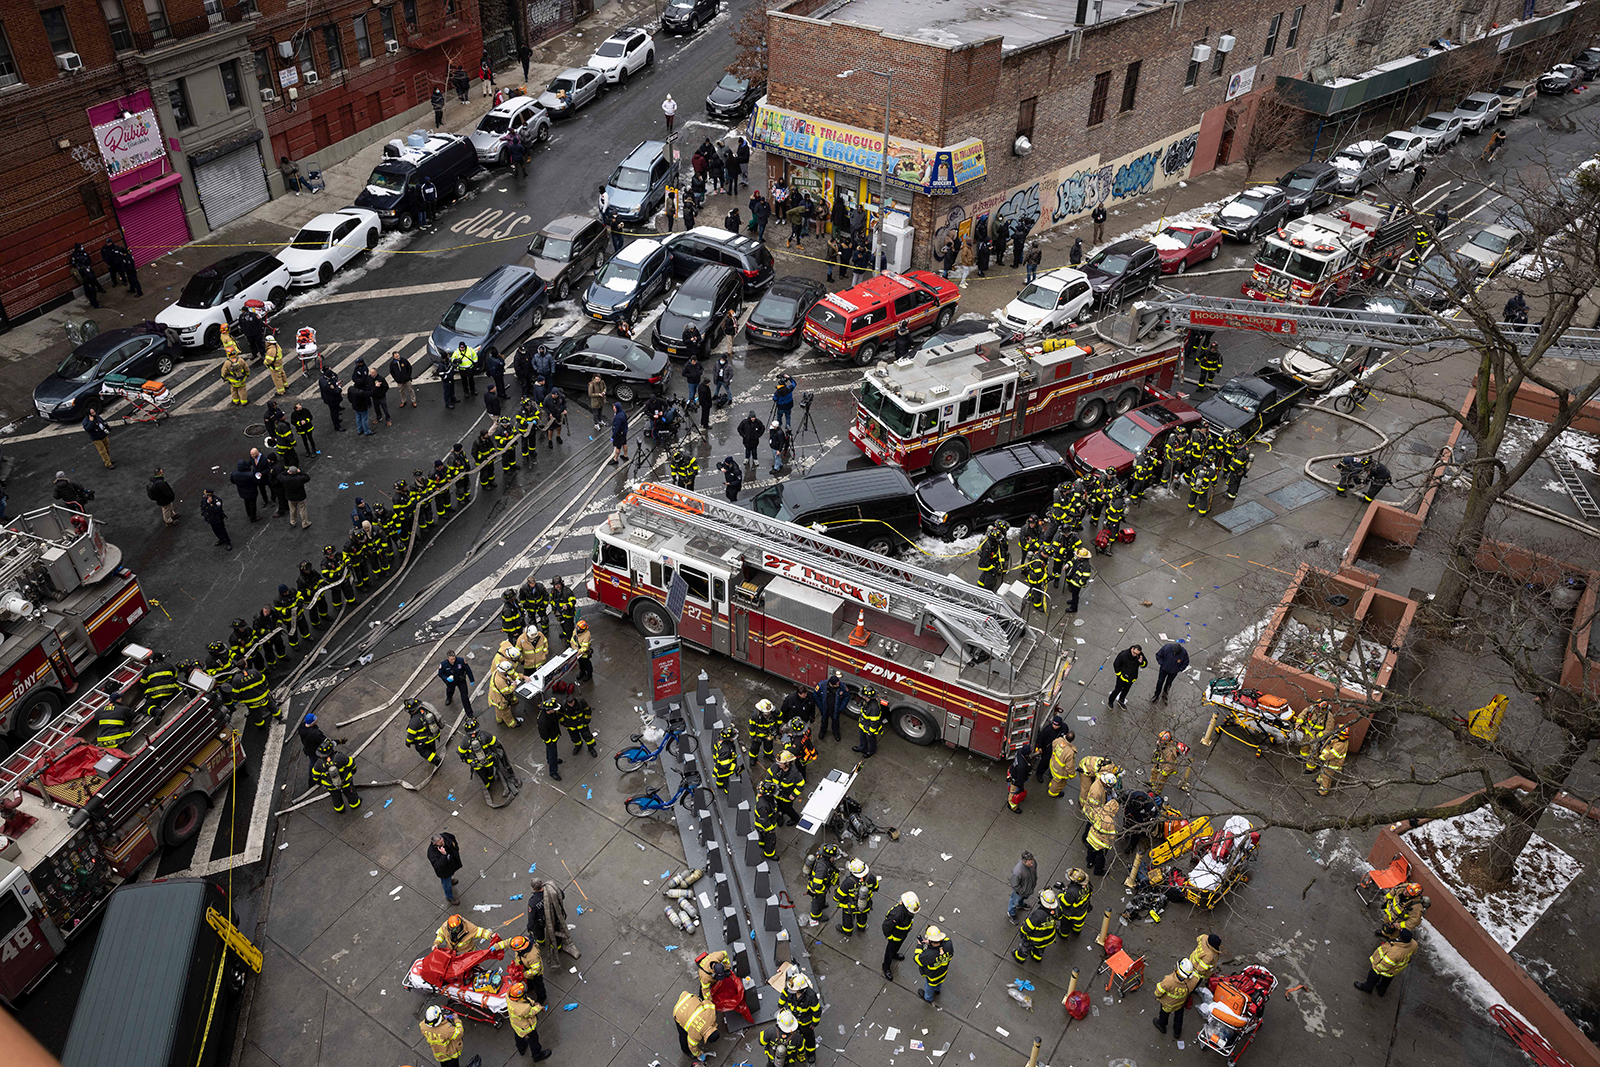 Firefighters work outside an apartment building after a fire in the Bronx, on January 9 in New York. (Yuki Iwamura/AP)